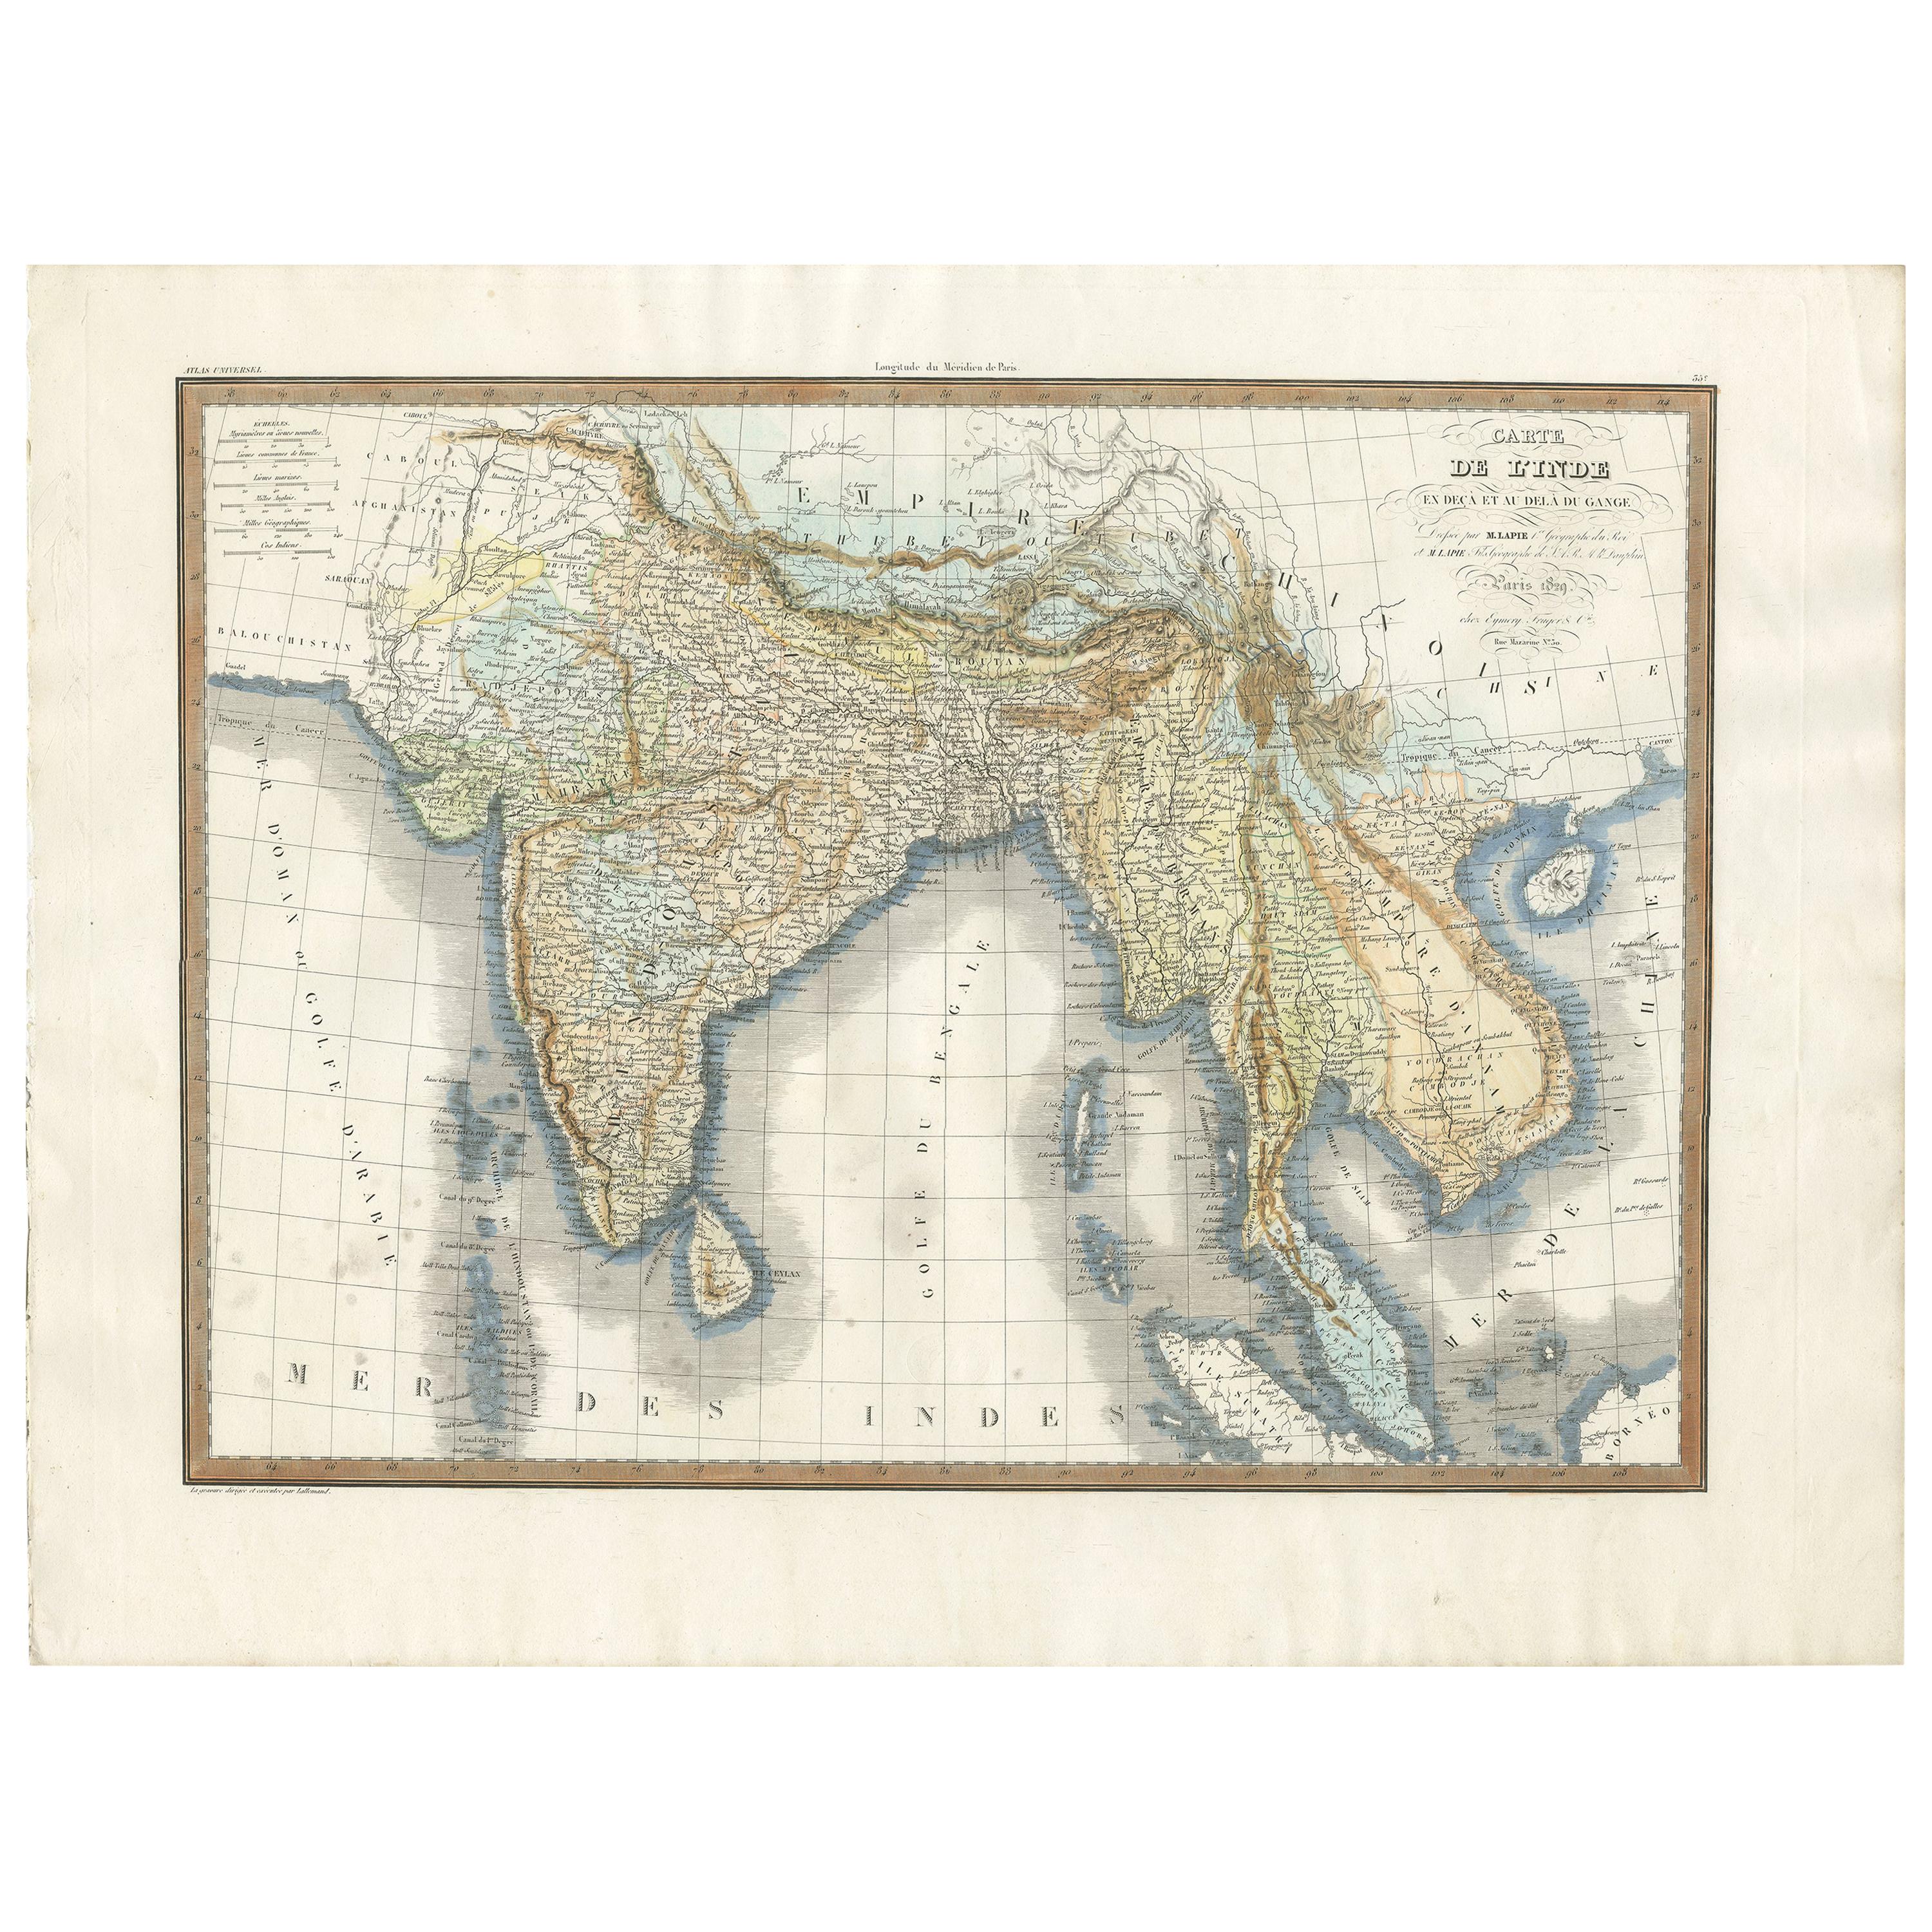 Original Antique Map of Southern Asia, Published in 1833